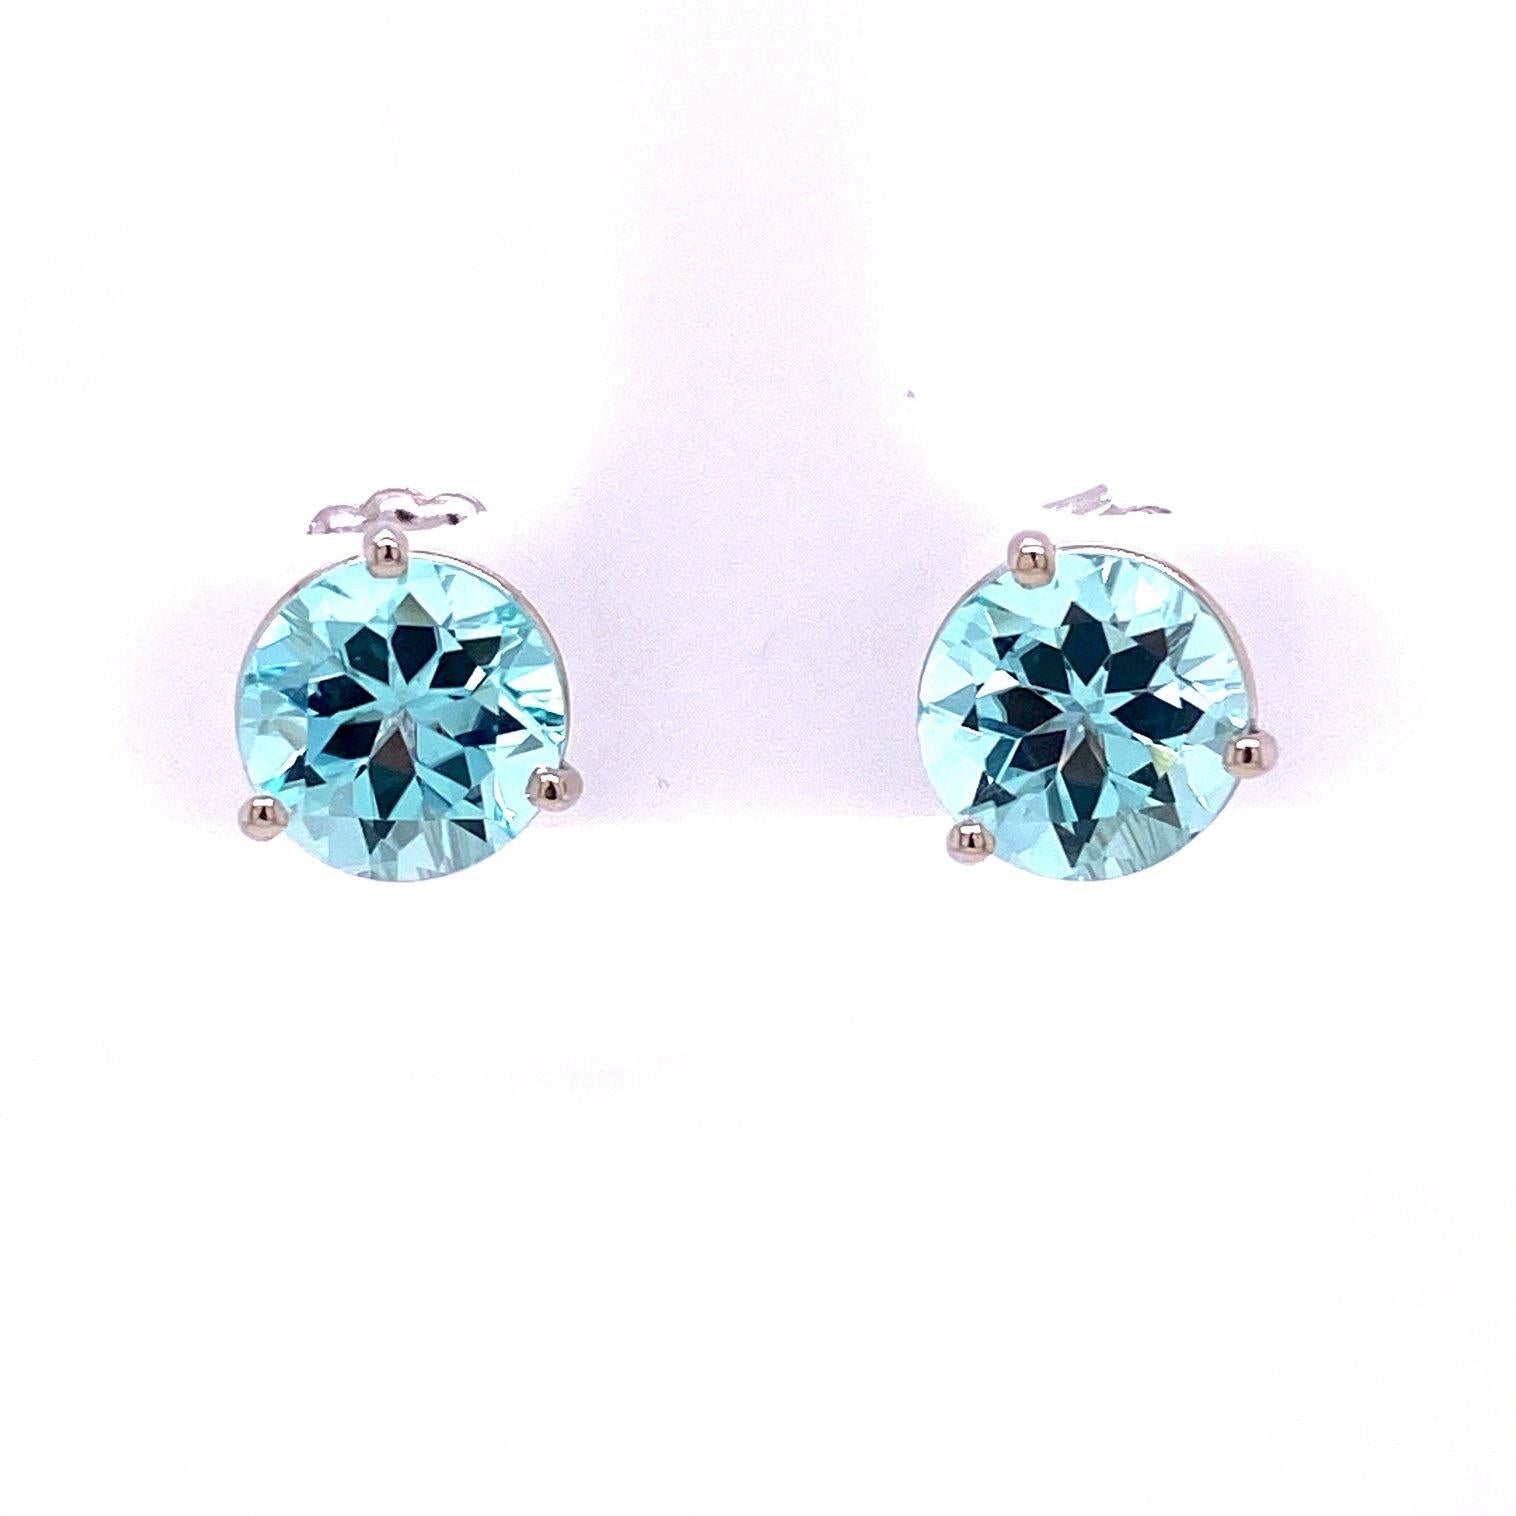 A pair of 18k white gold studs set with 4.11 carats of round blue tourmaline, with a pair of white speckled druzy wing jackets set in sterling silver. These earrings were made and designed by llyn strong.

Items sold separately upon request.